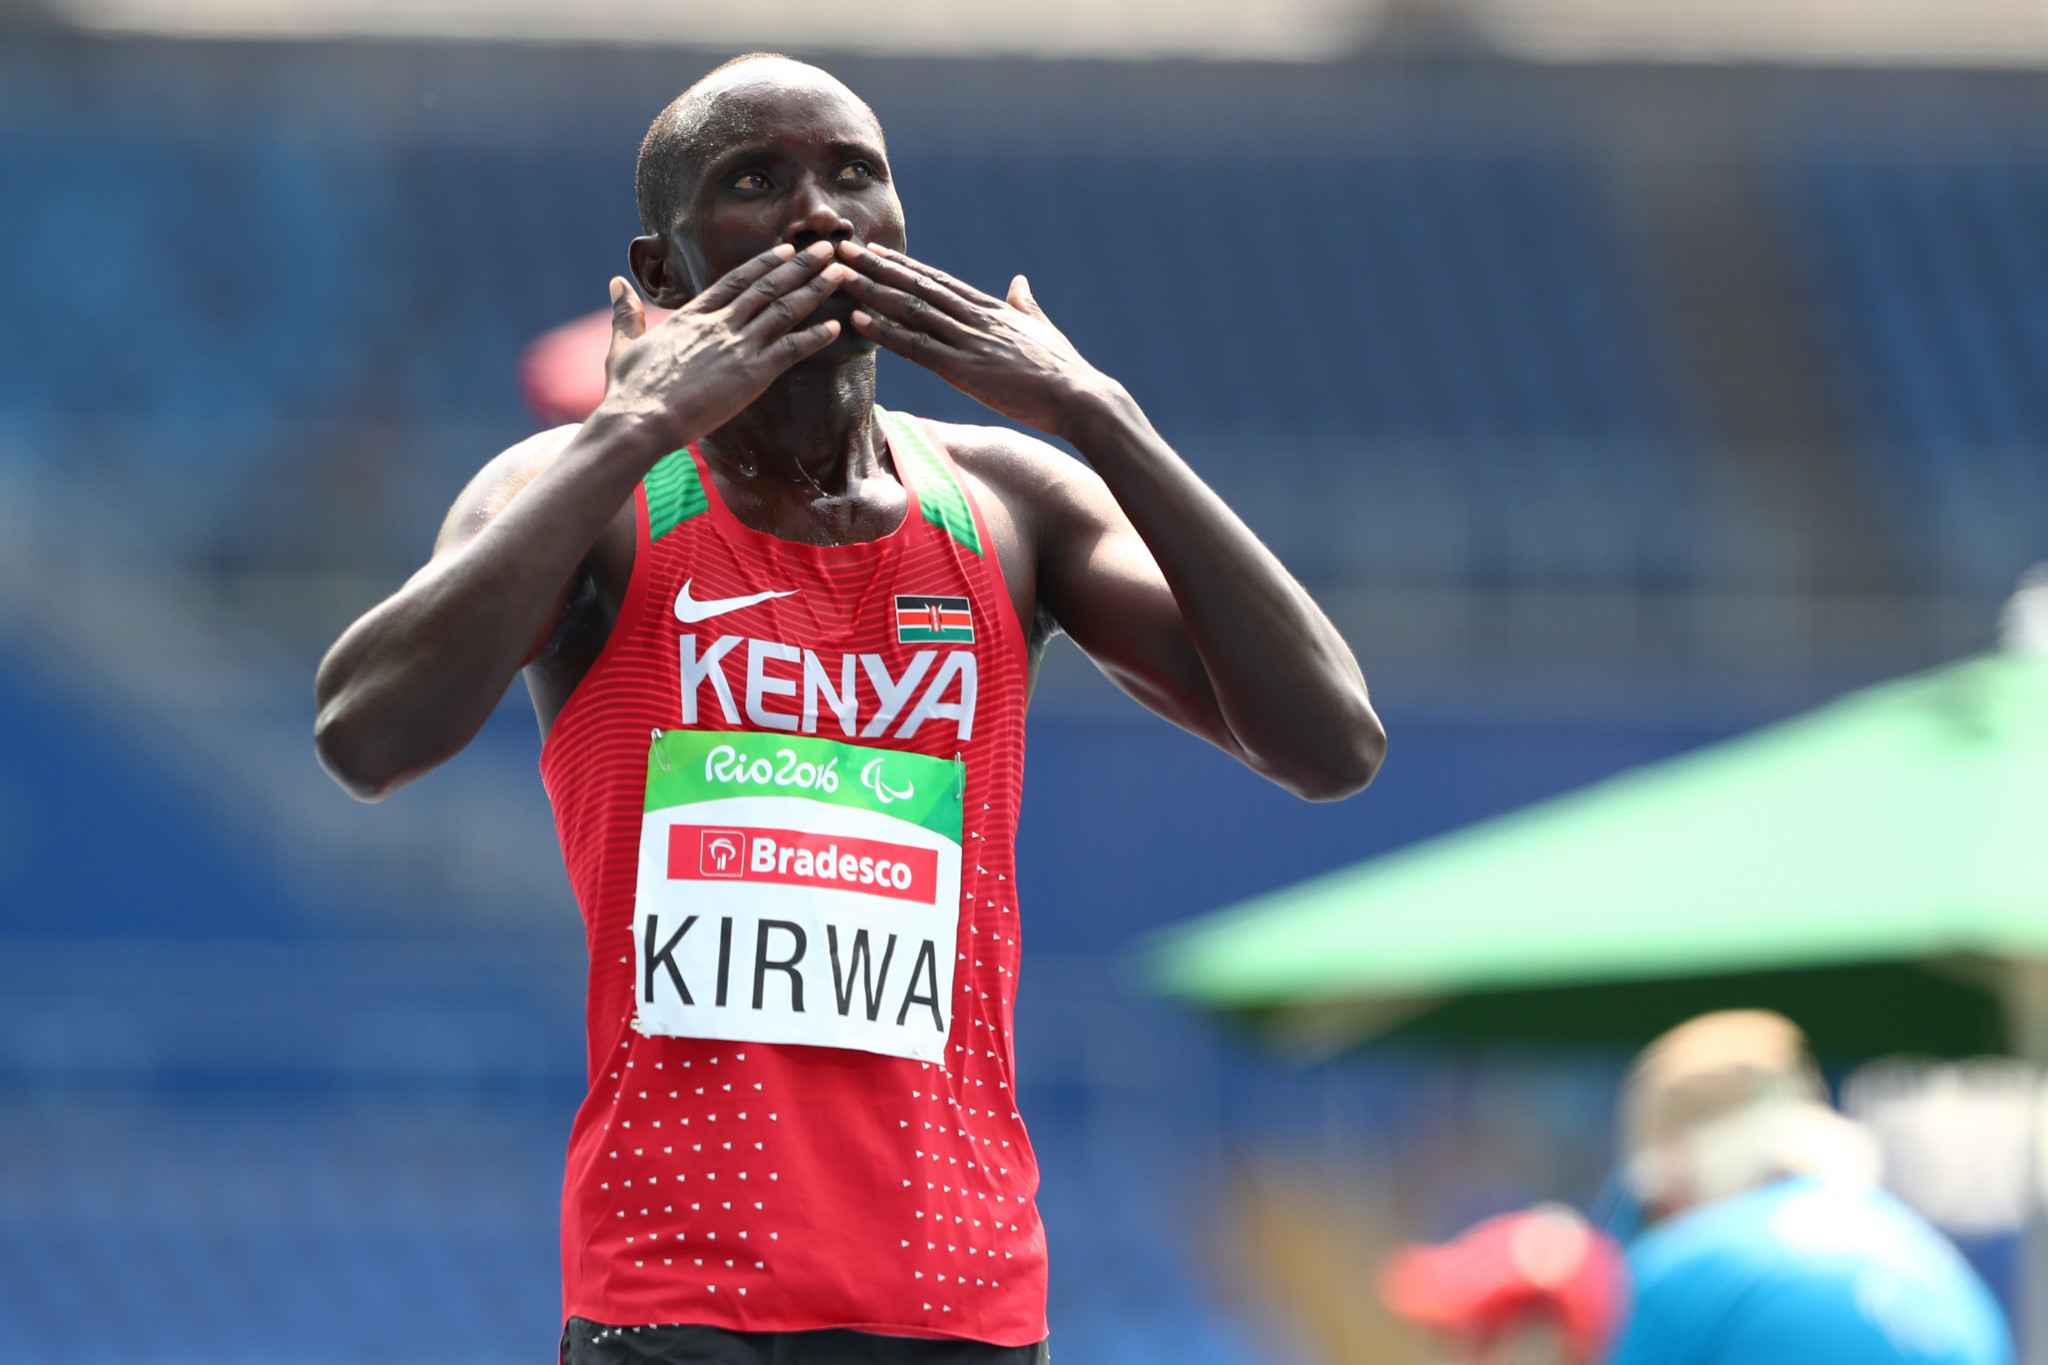 Henry Kirwa will switch to contesting marathons after Tokyo 2020 ©Getty Images